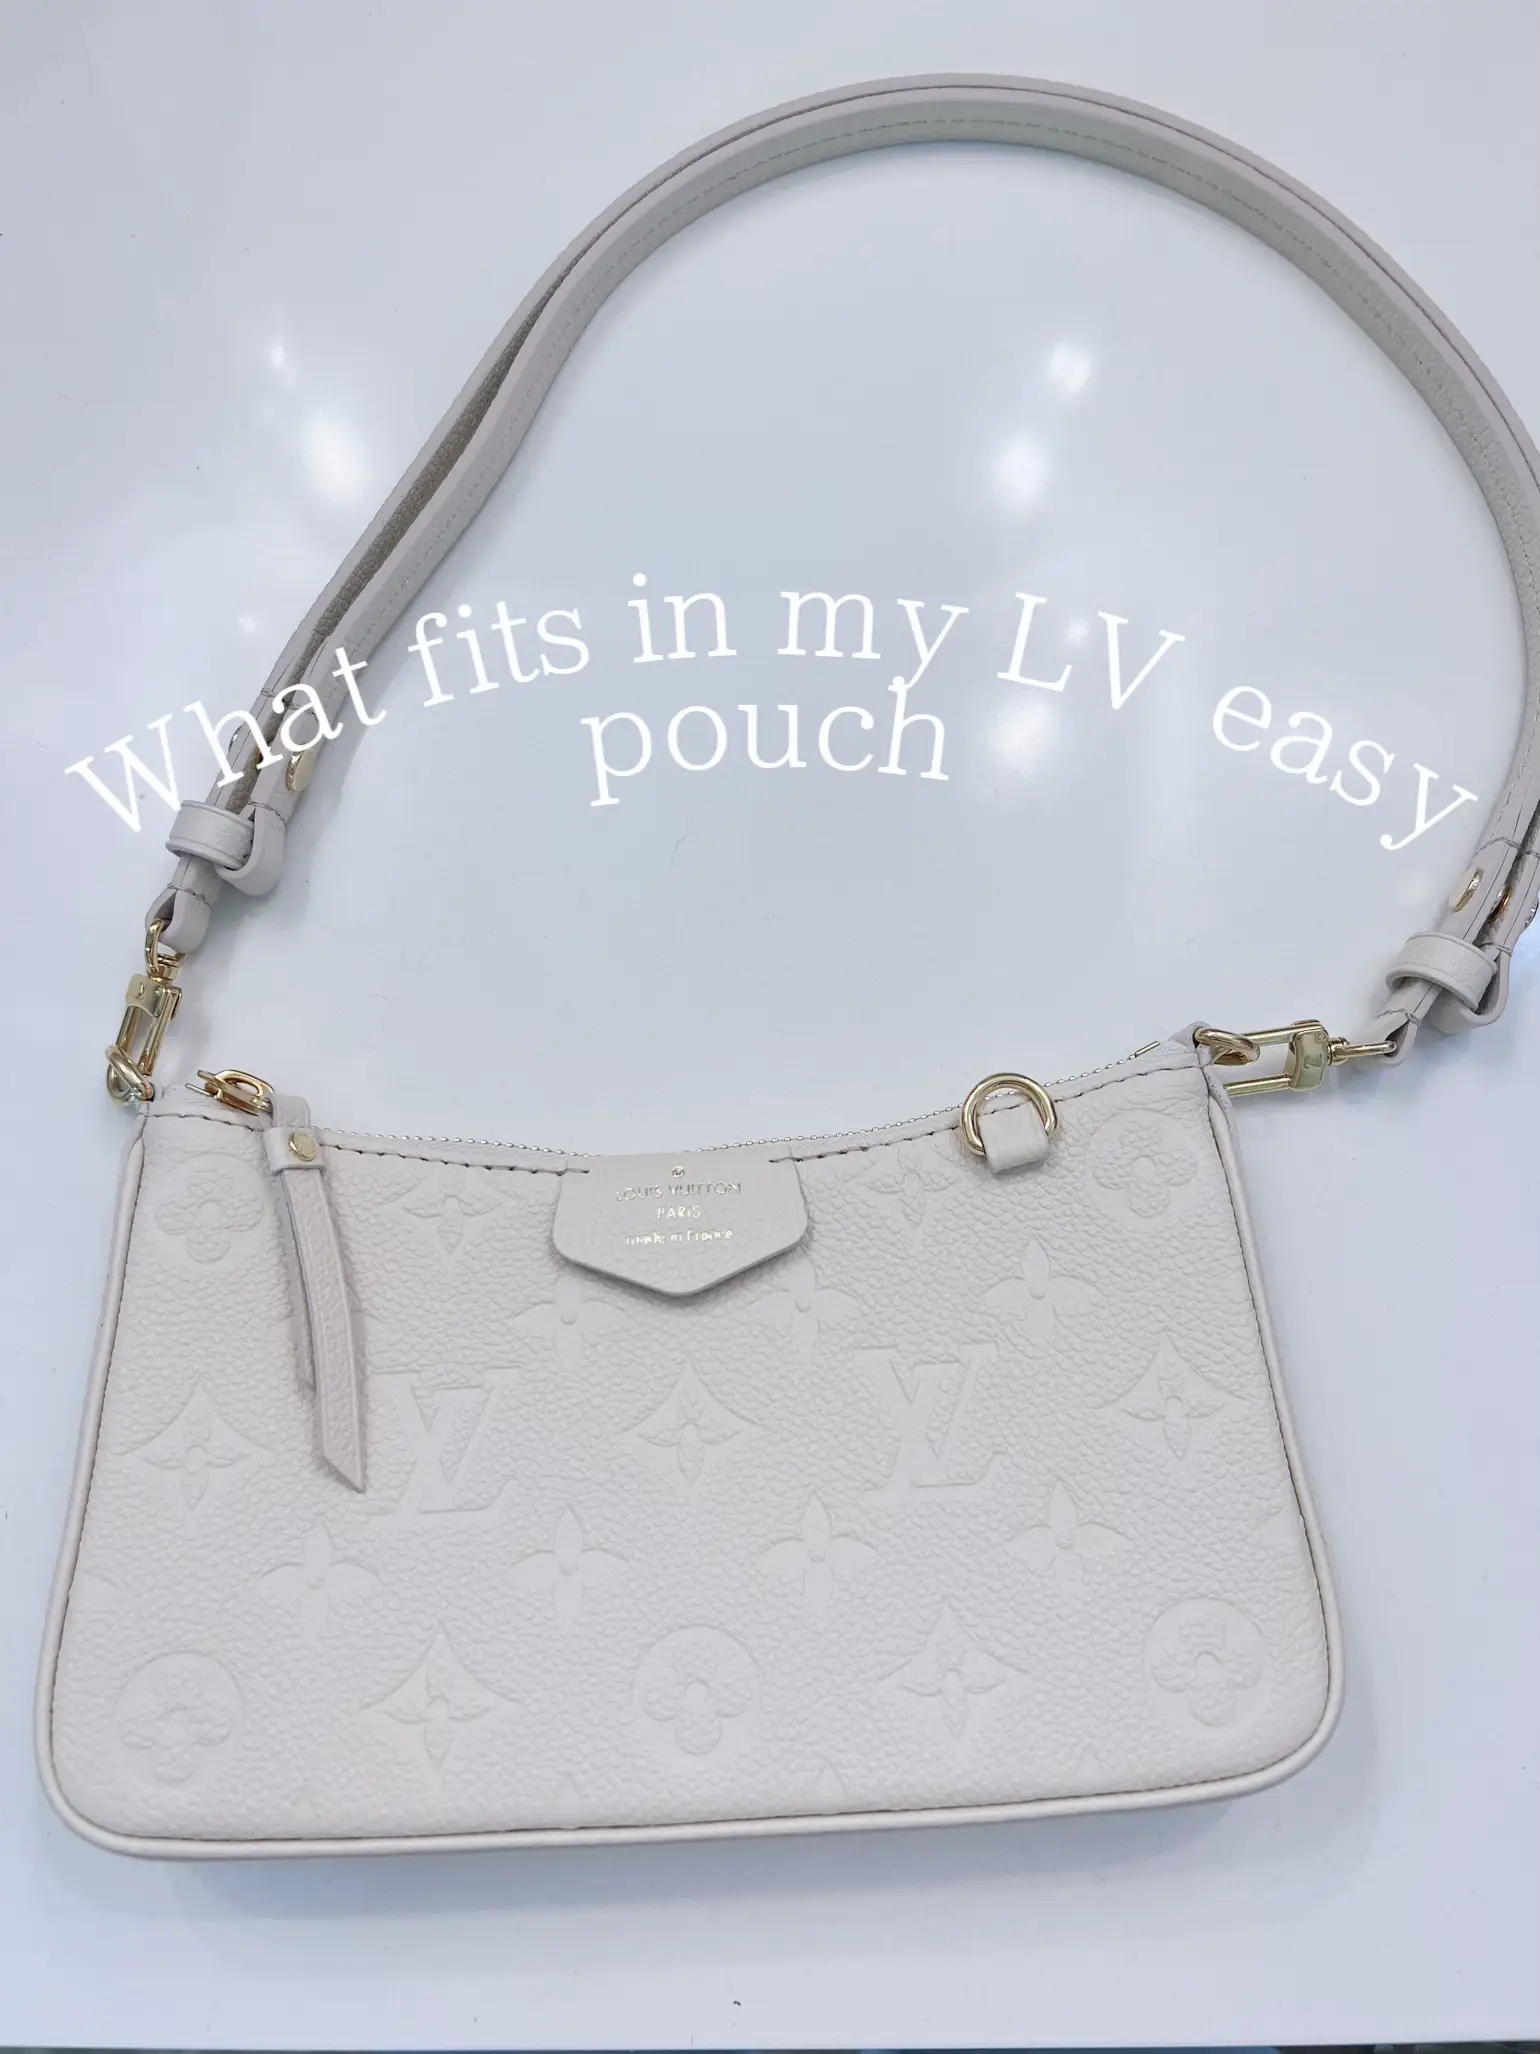 Loving my easy pouch on strap bag from Louis Vuitton #louisvuitton